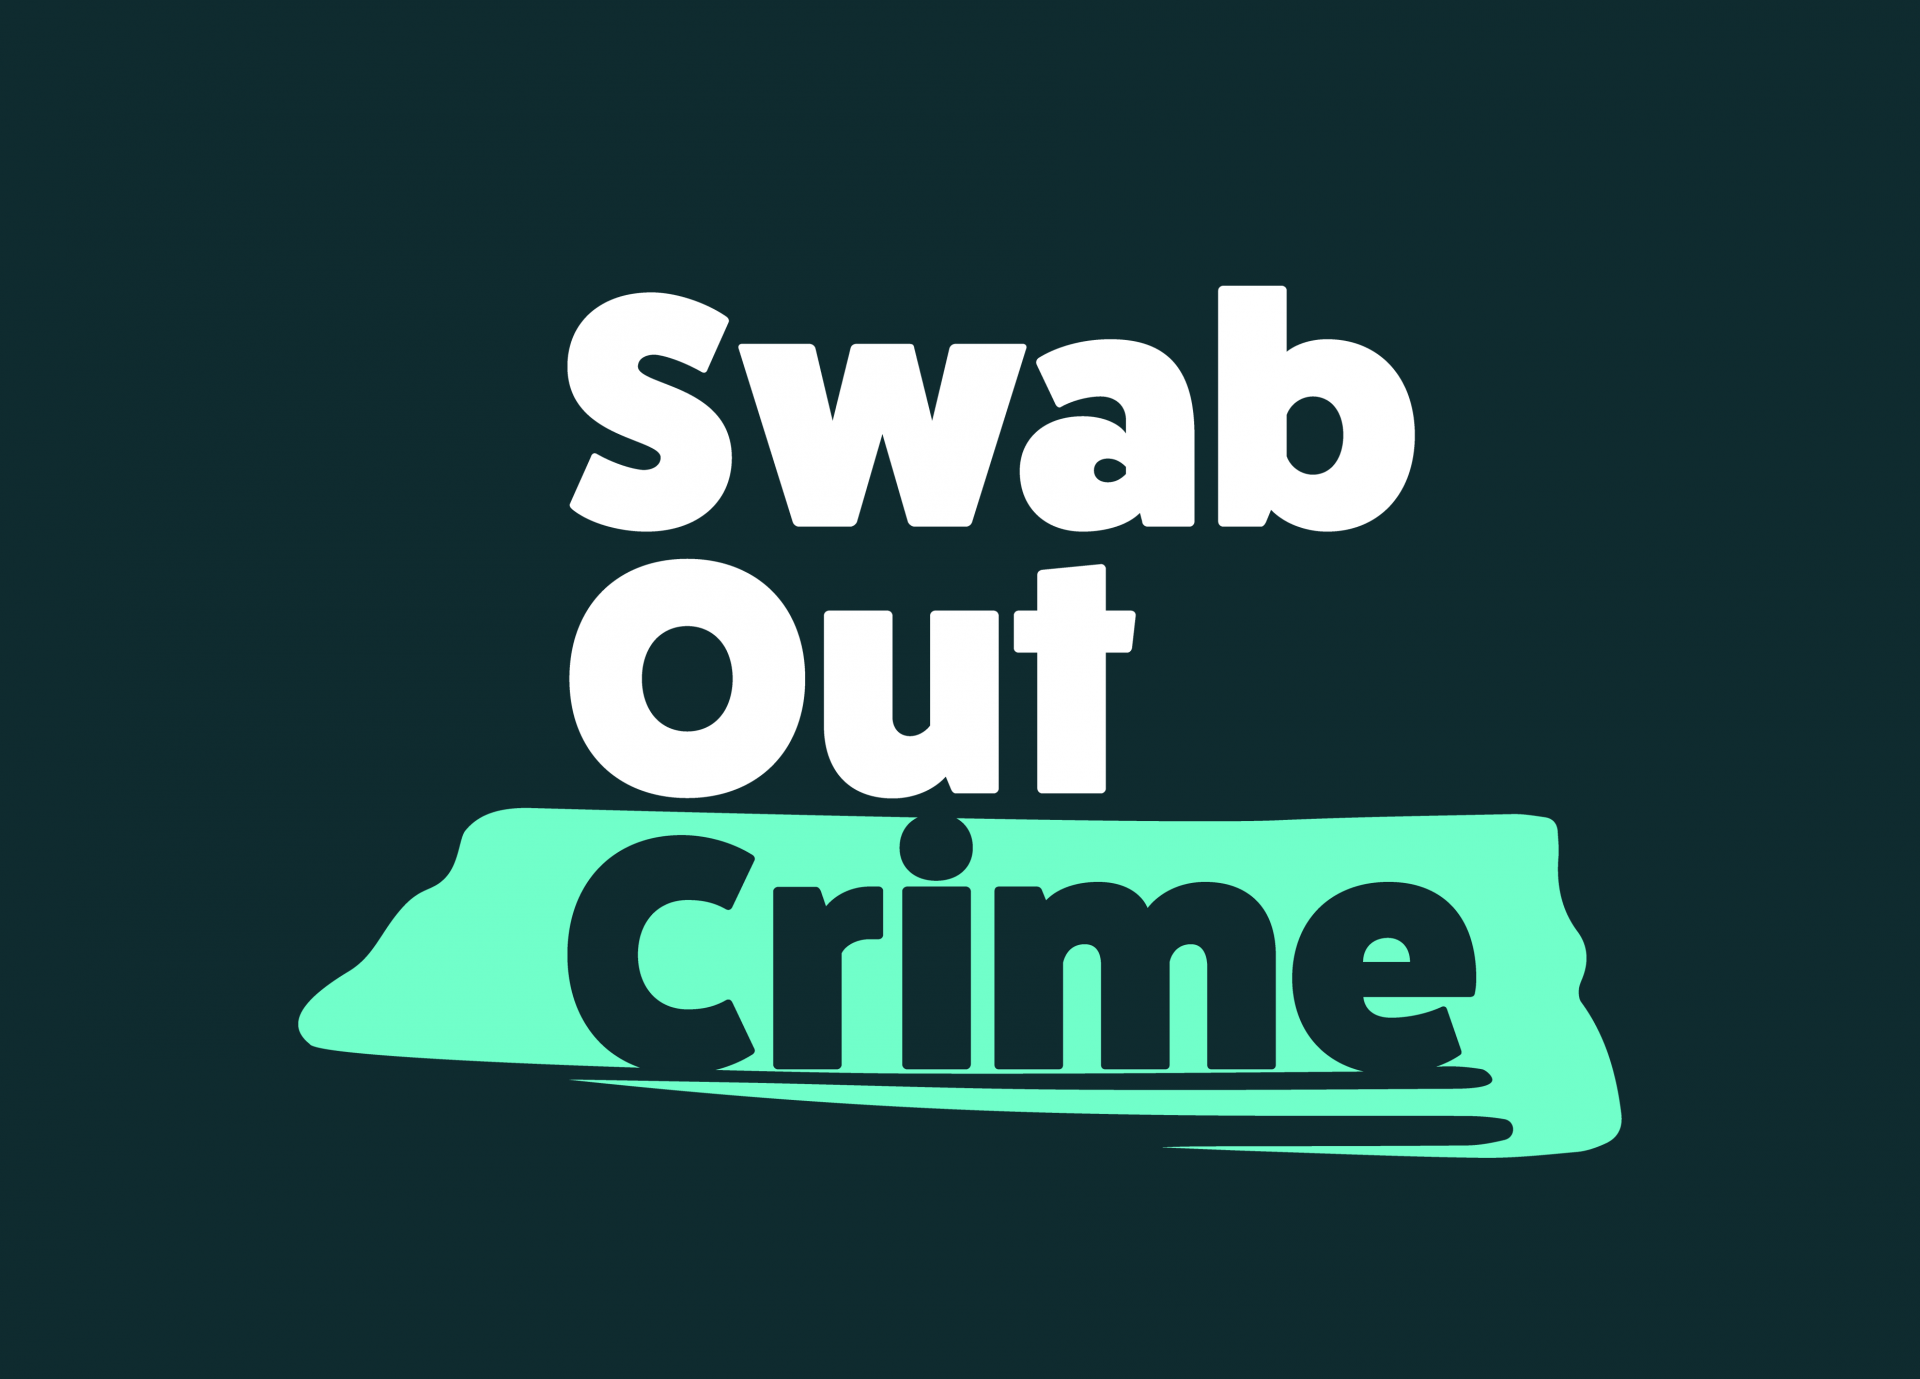 Swab Out Crime logo with background